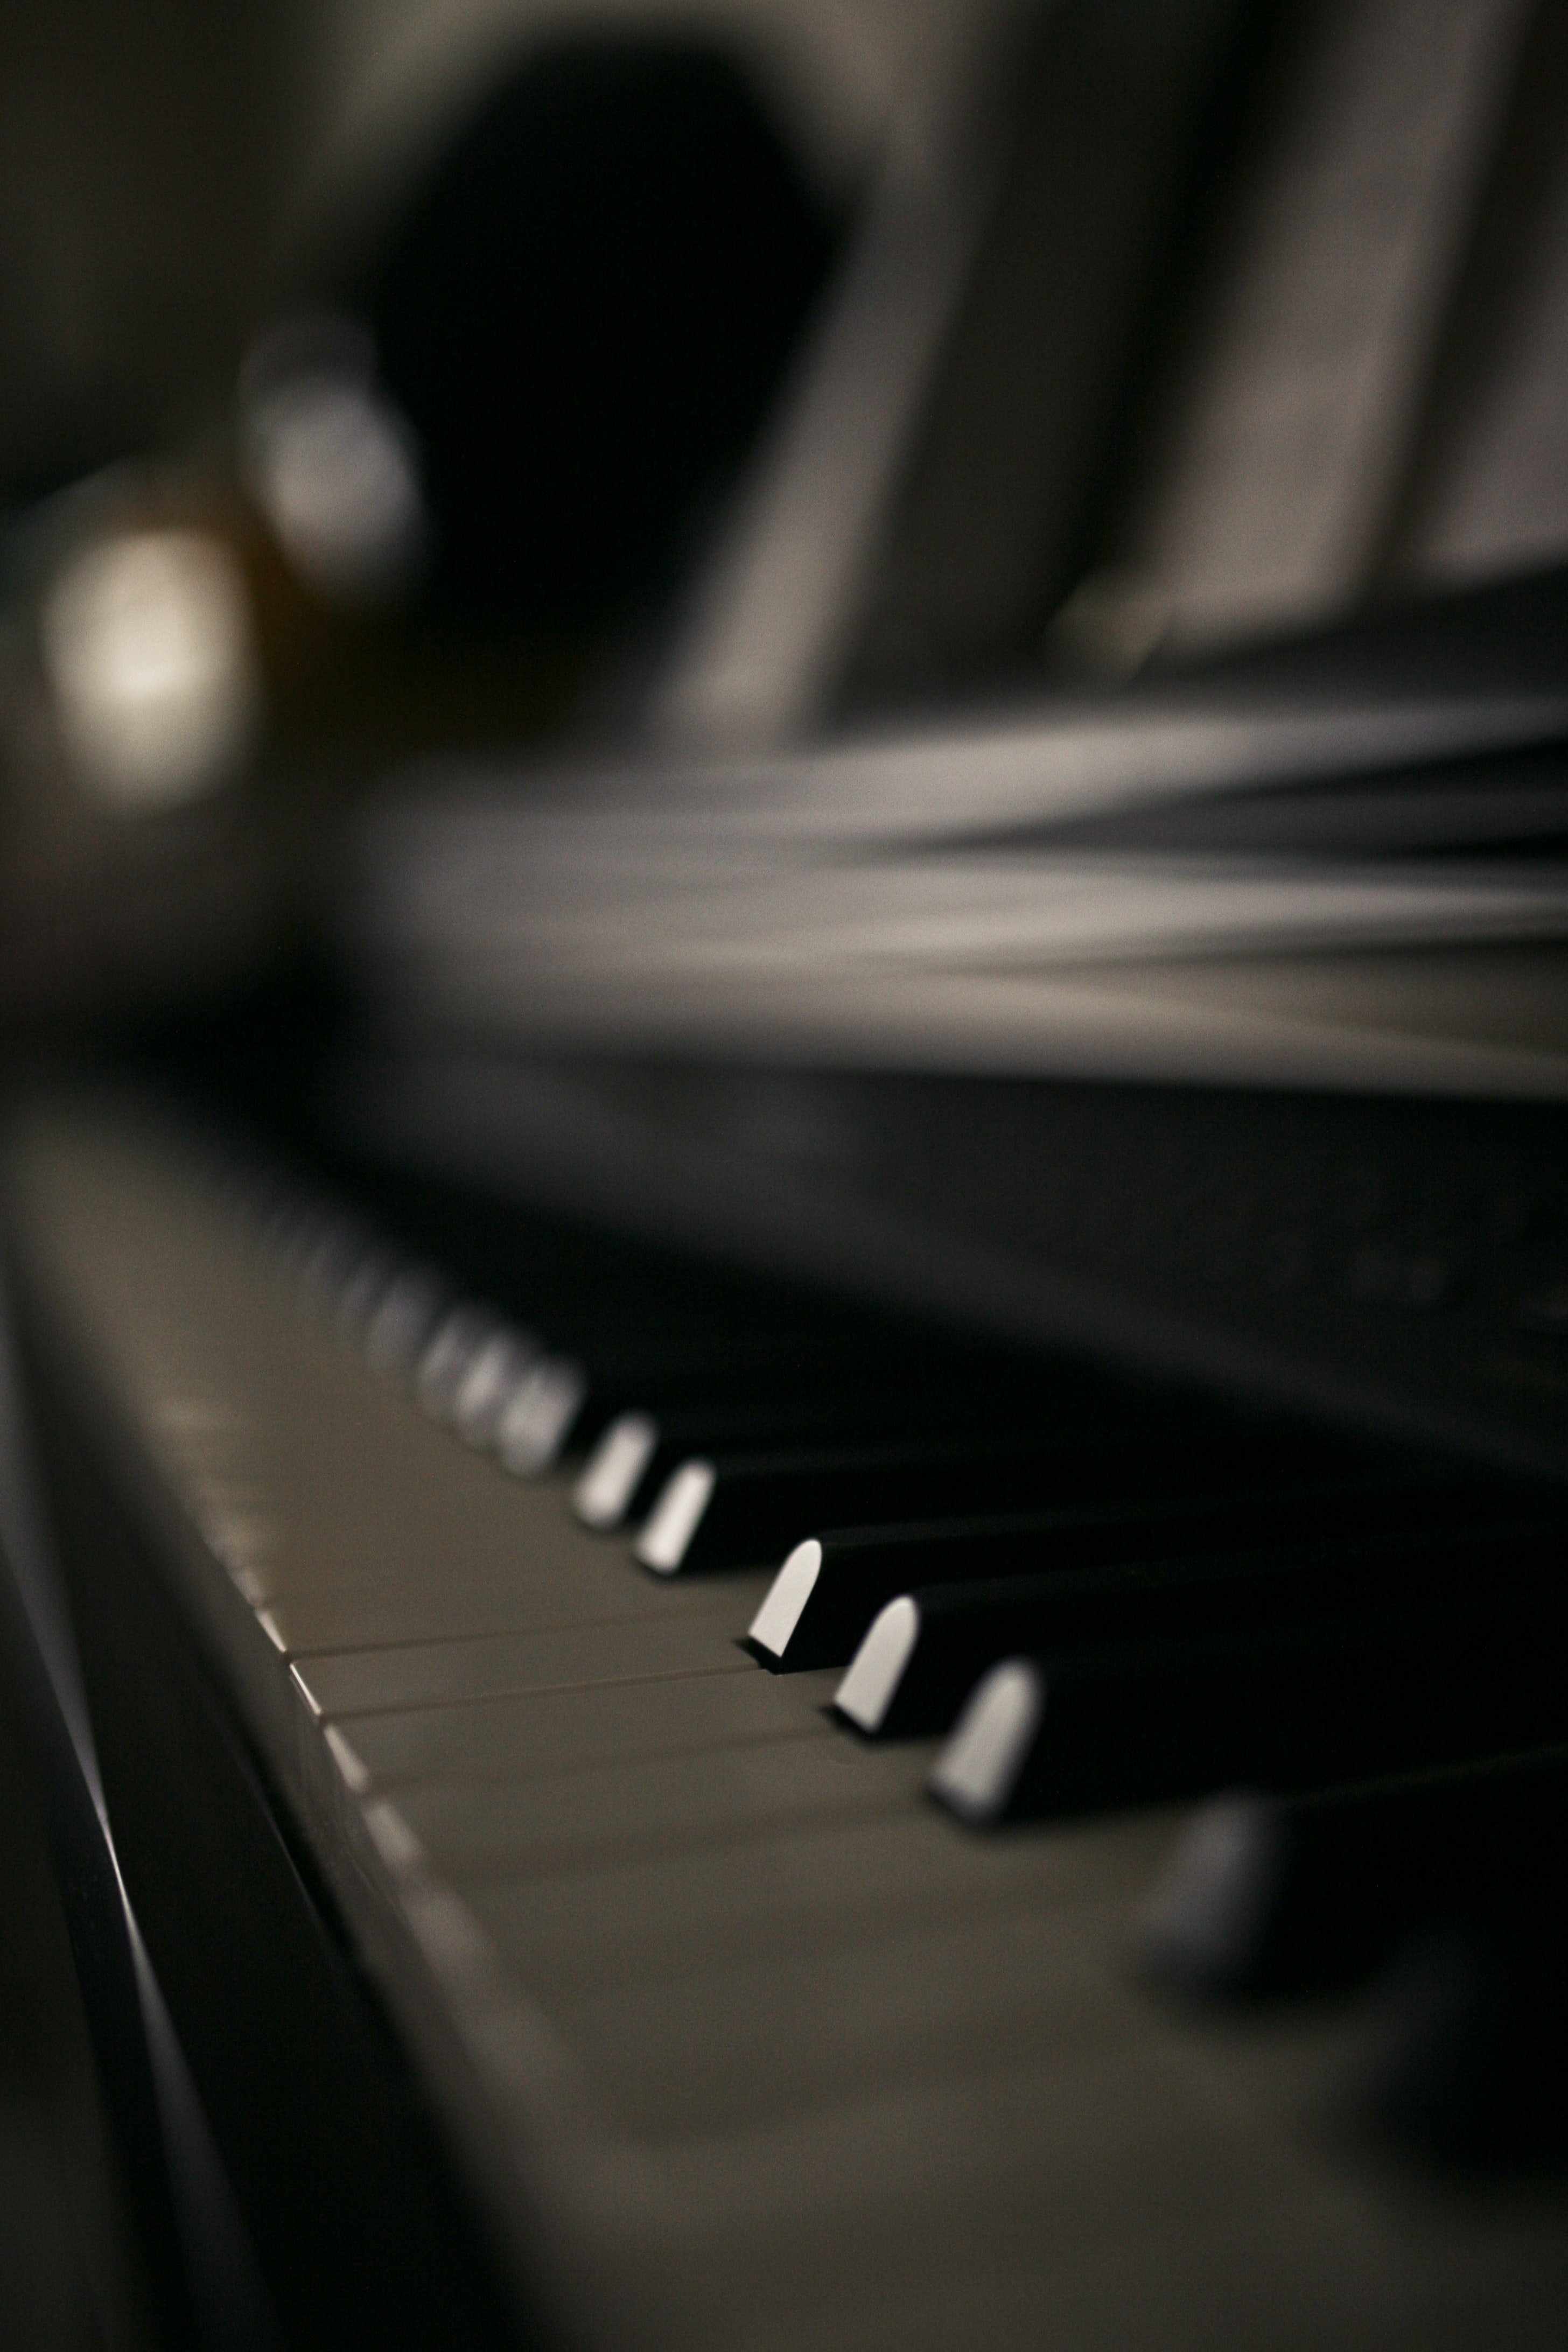 154520 download wallpaper piano, music, macro, musical instrument, bw, chb, keys screensavers and pictures for free